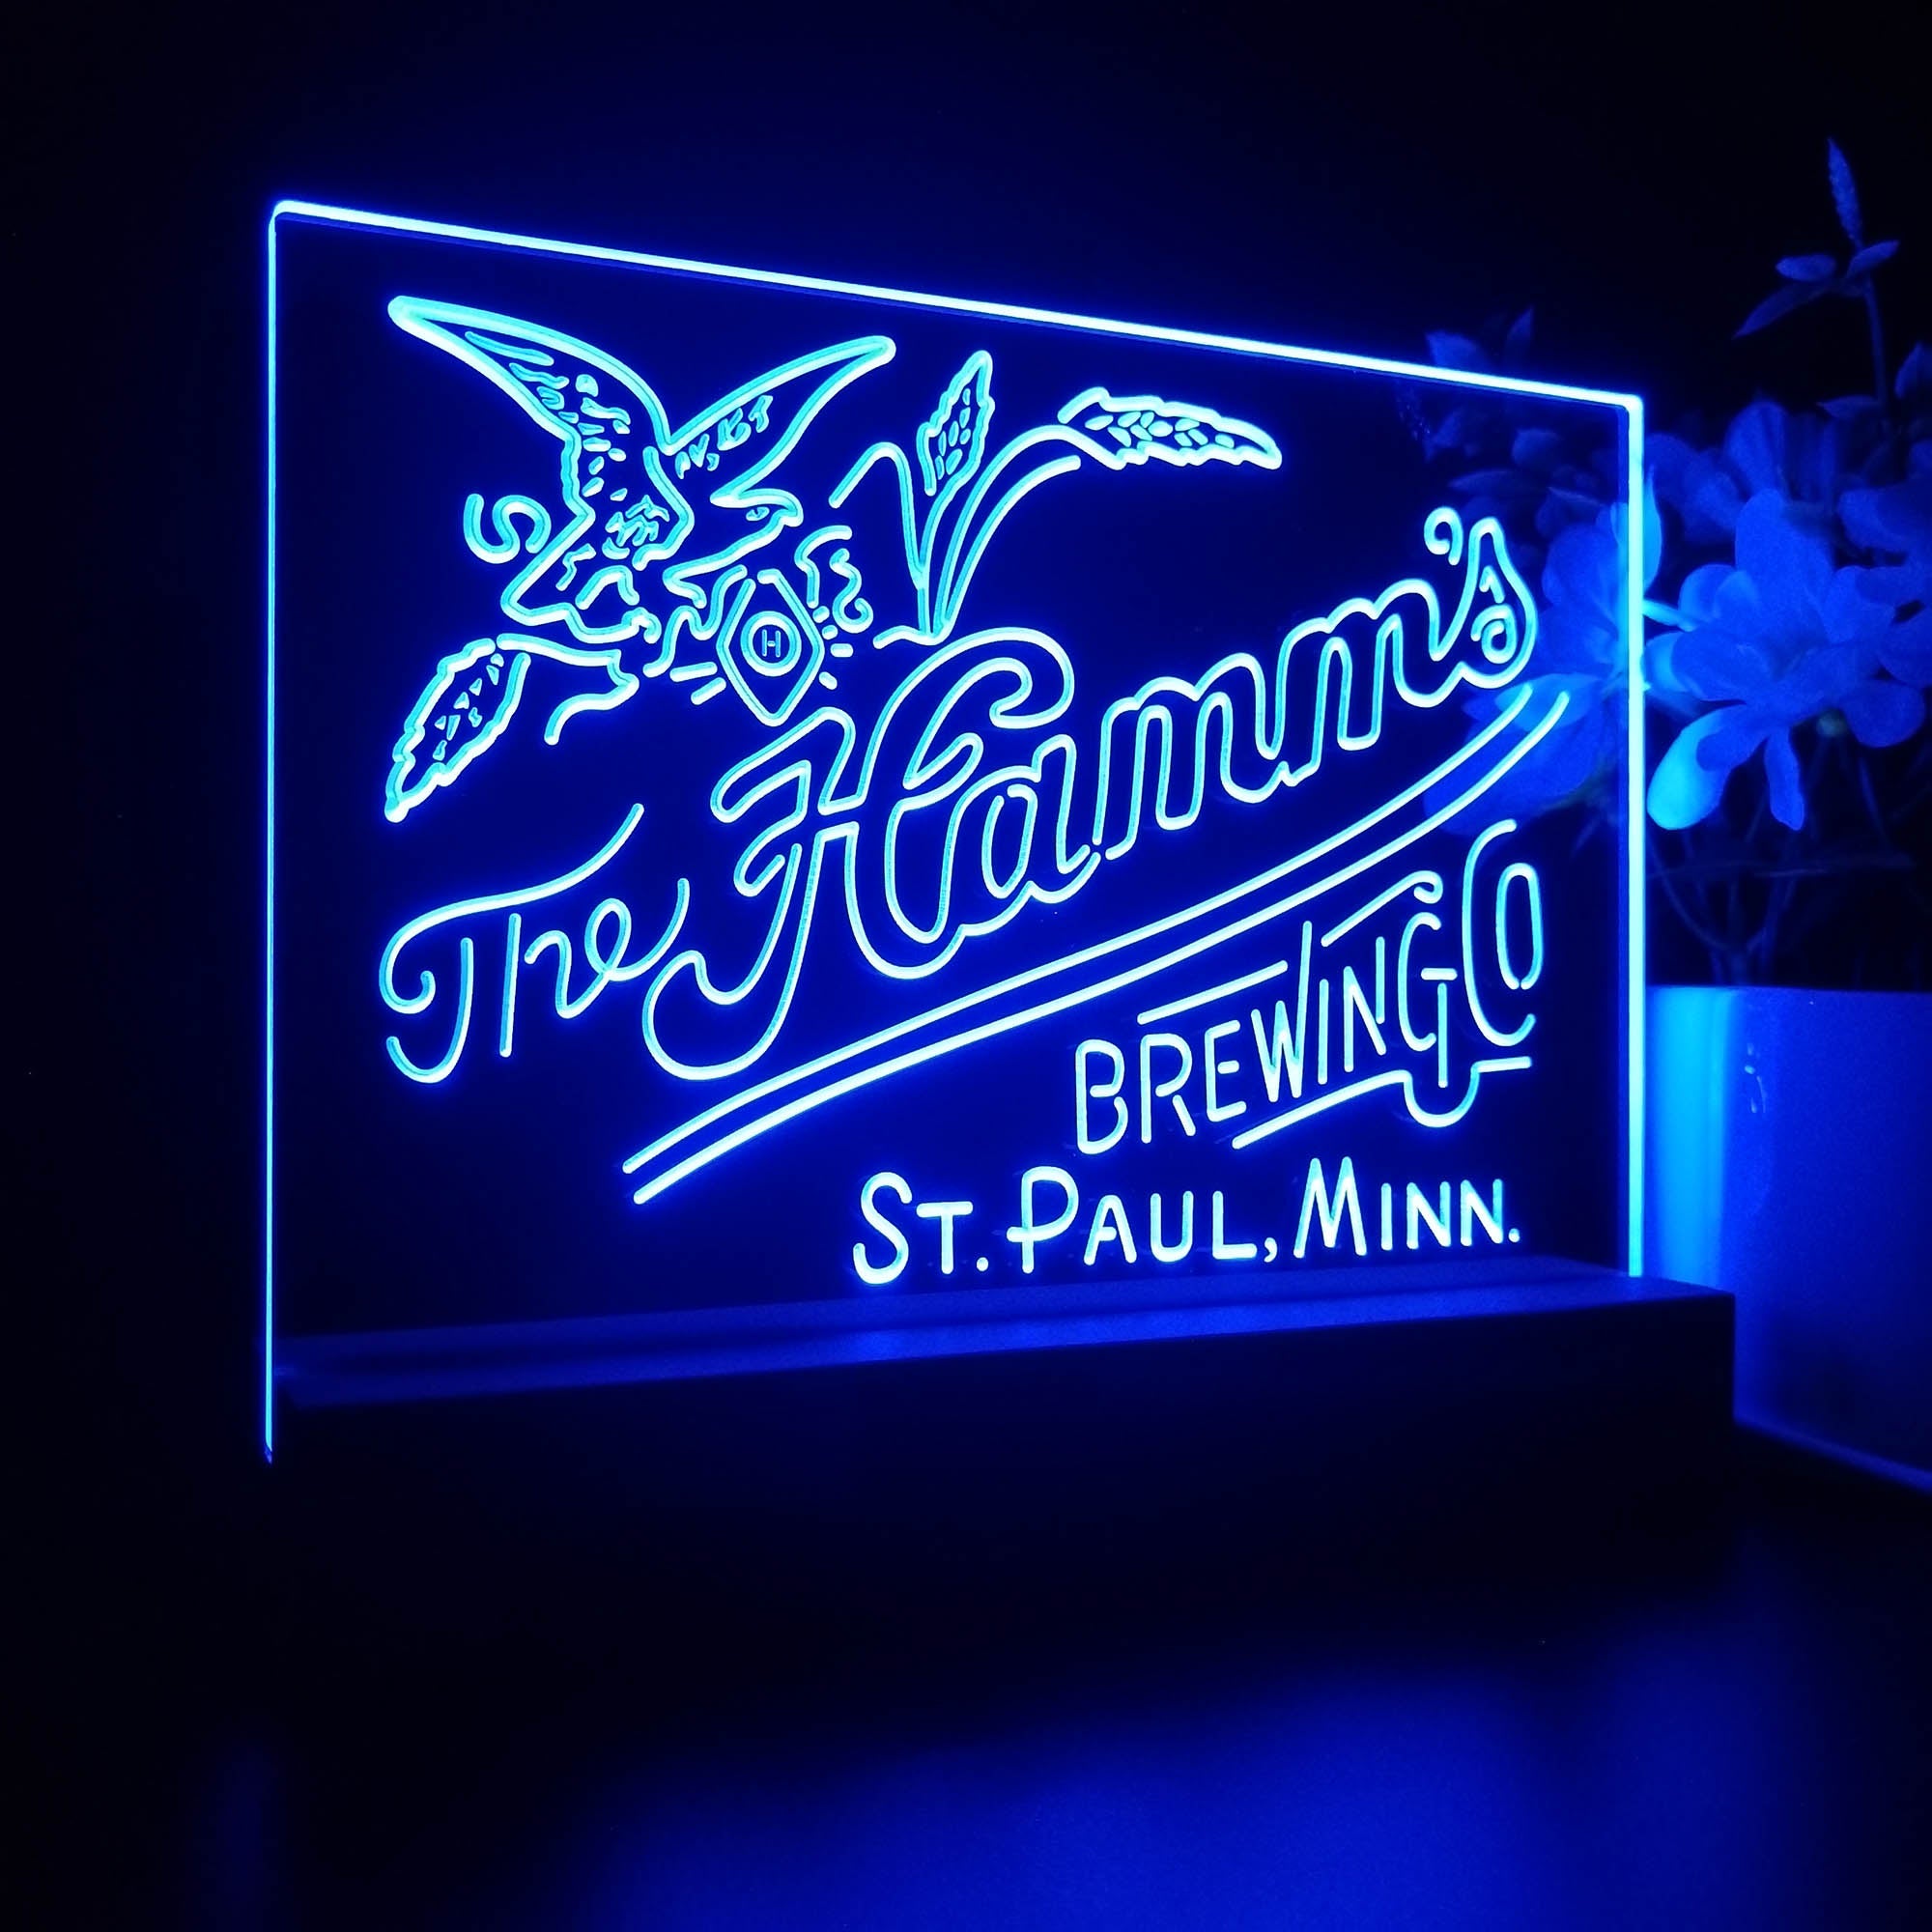 The Hamm's Brewing Company Night Light LED Sign